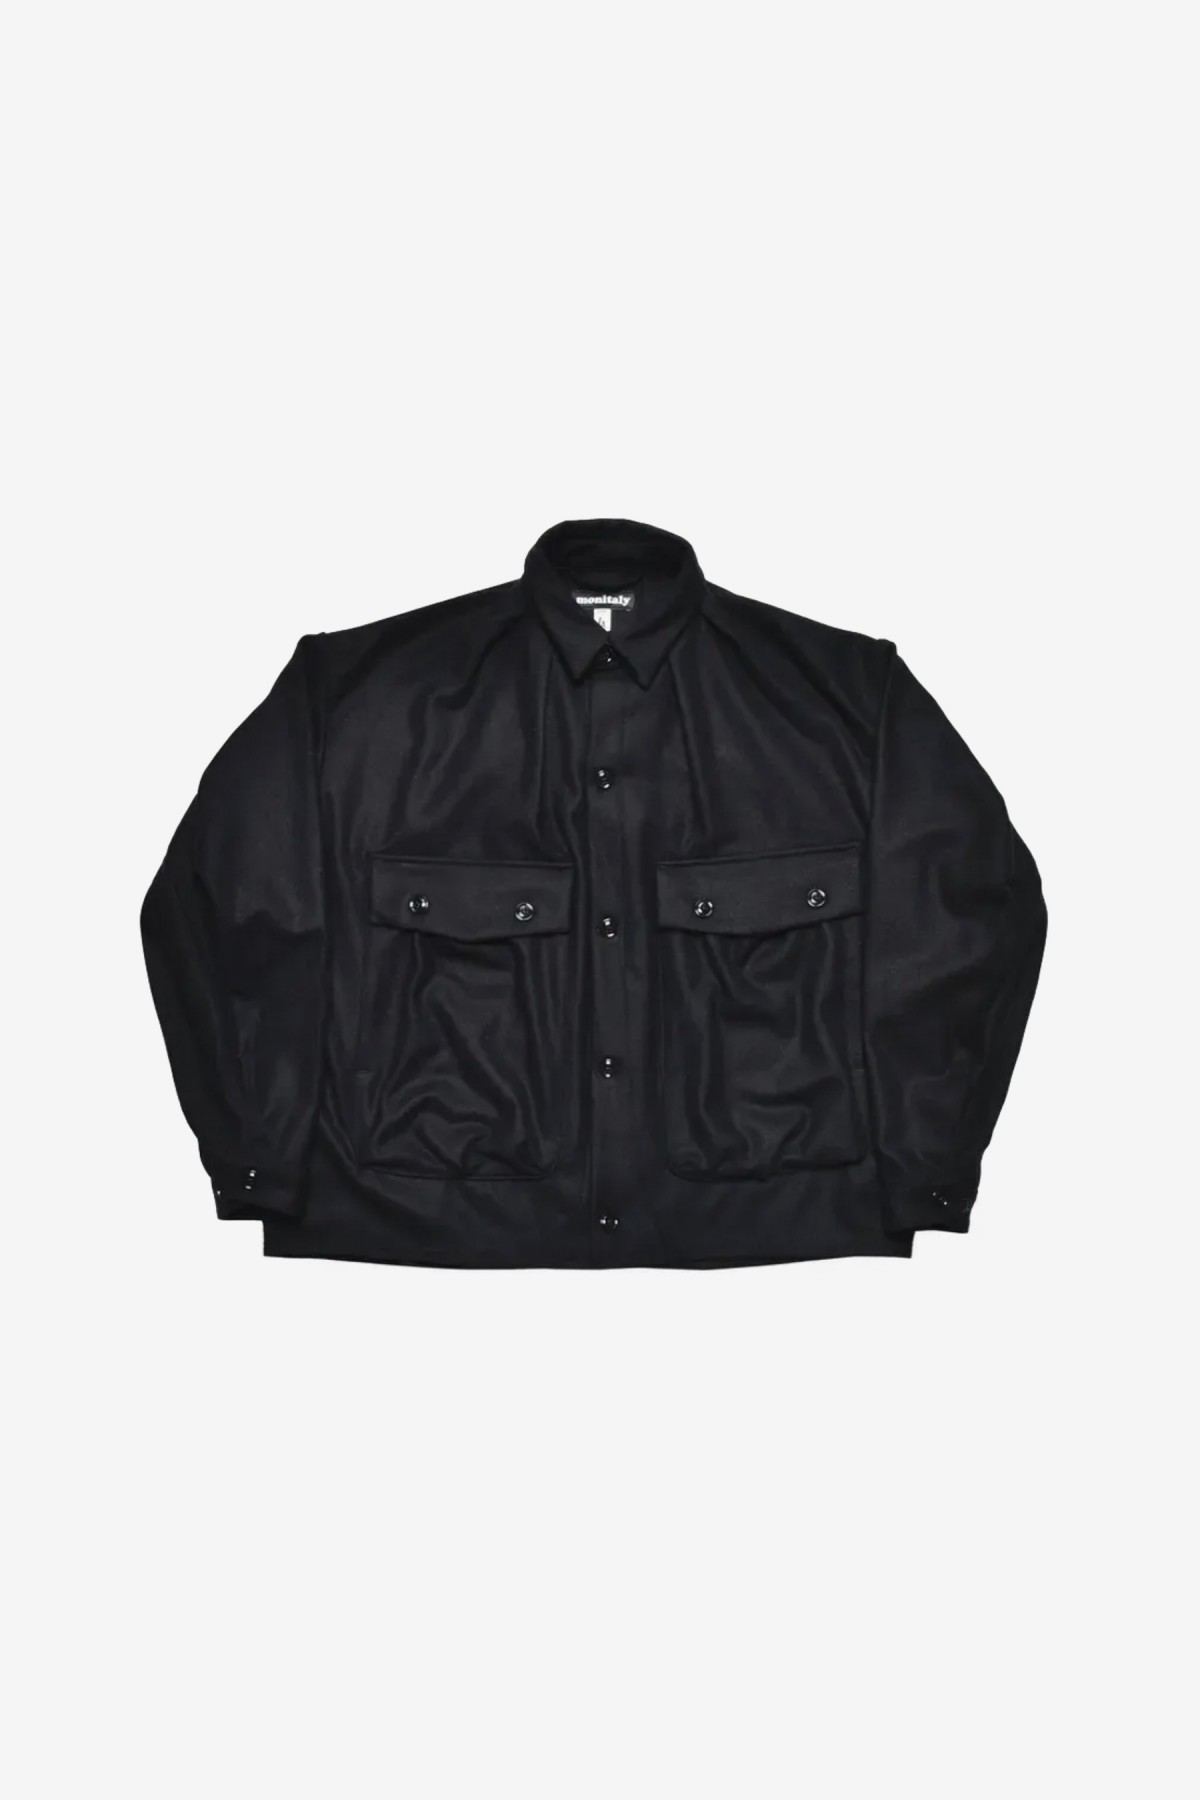 Monitaly Lazy Travel Jacket in Wool Flannel Solid Black